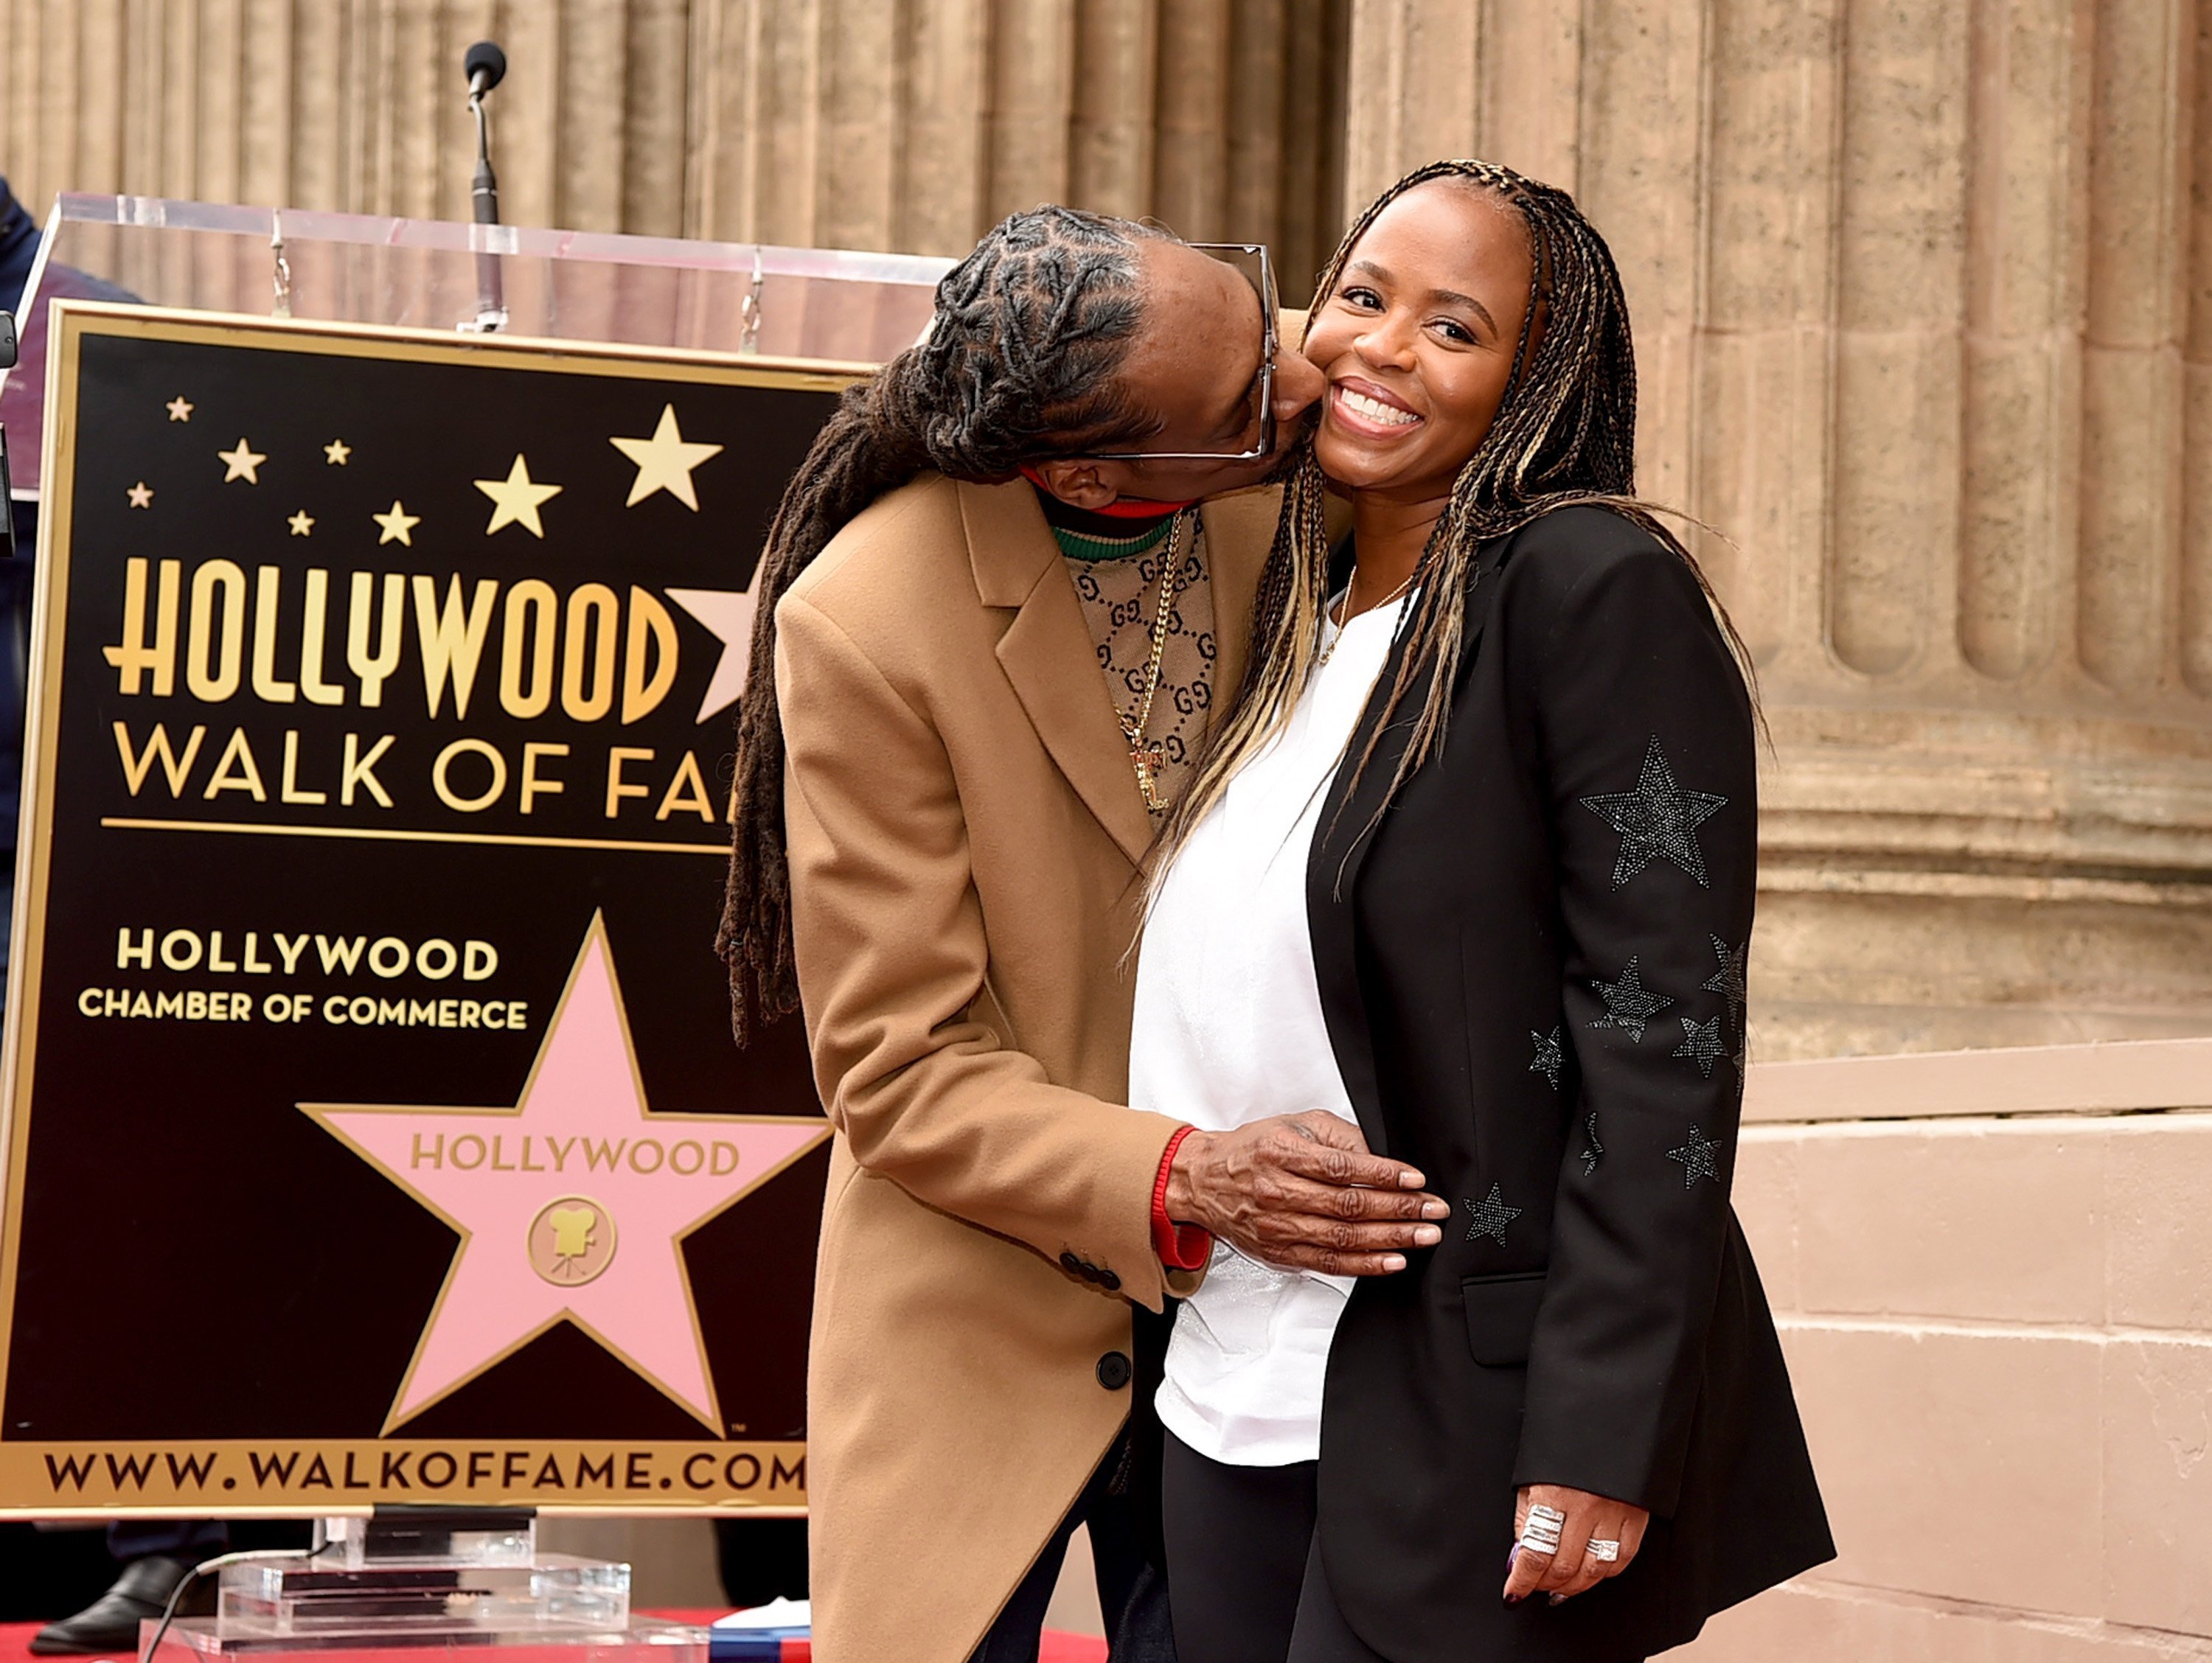 Snoop Dogg with his wife Shante Broadus as he was honored with a star at the Hollywood Walk Of Fame on Hollywood Boulevard on November 19, 2018. | Photo: Getty Images